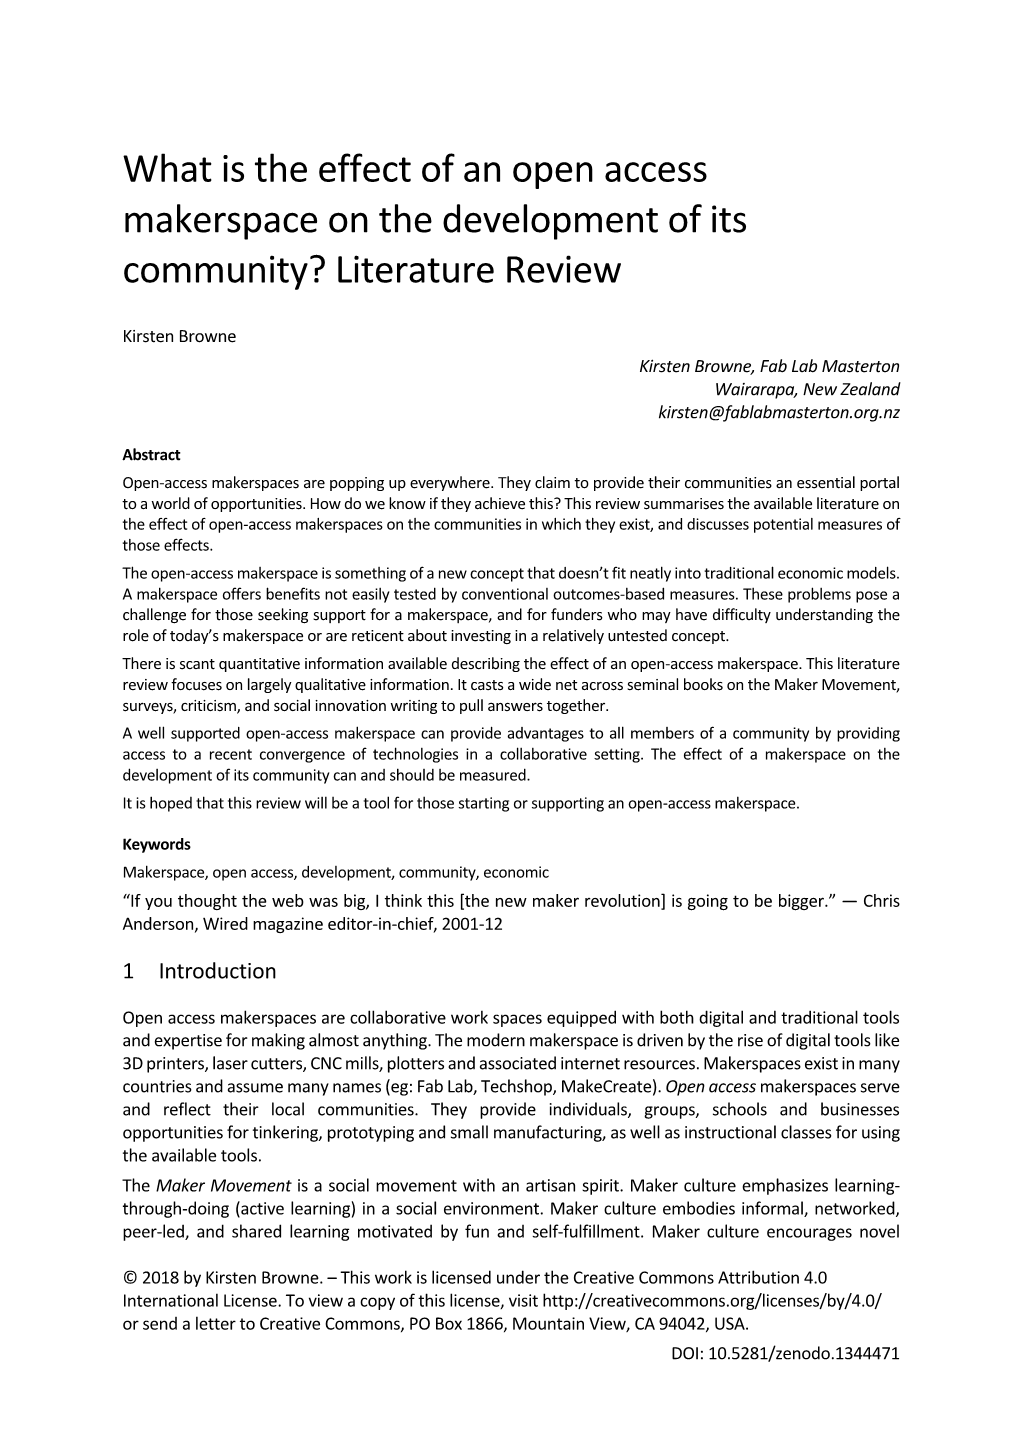 What Is the Effect of an Open Access Makerspace on the Development of Its Community? Literature Review